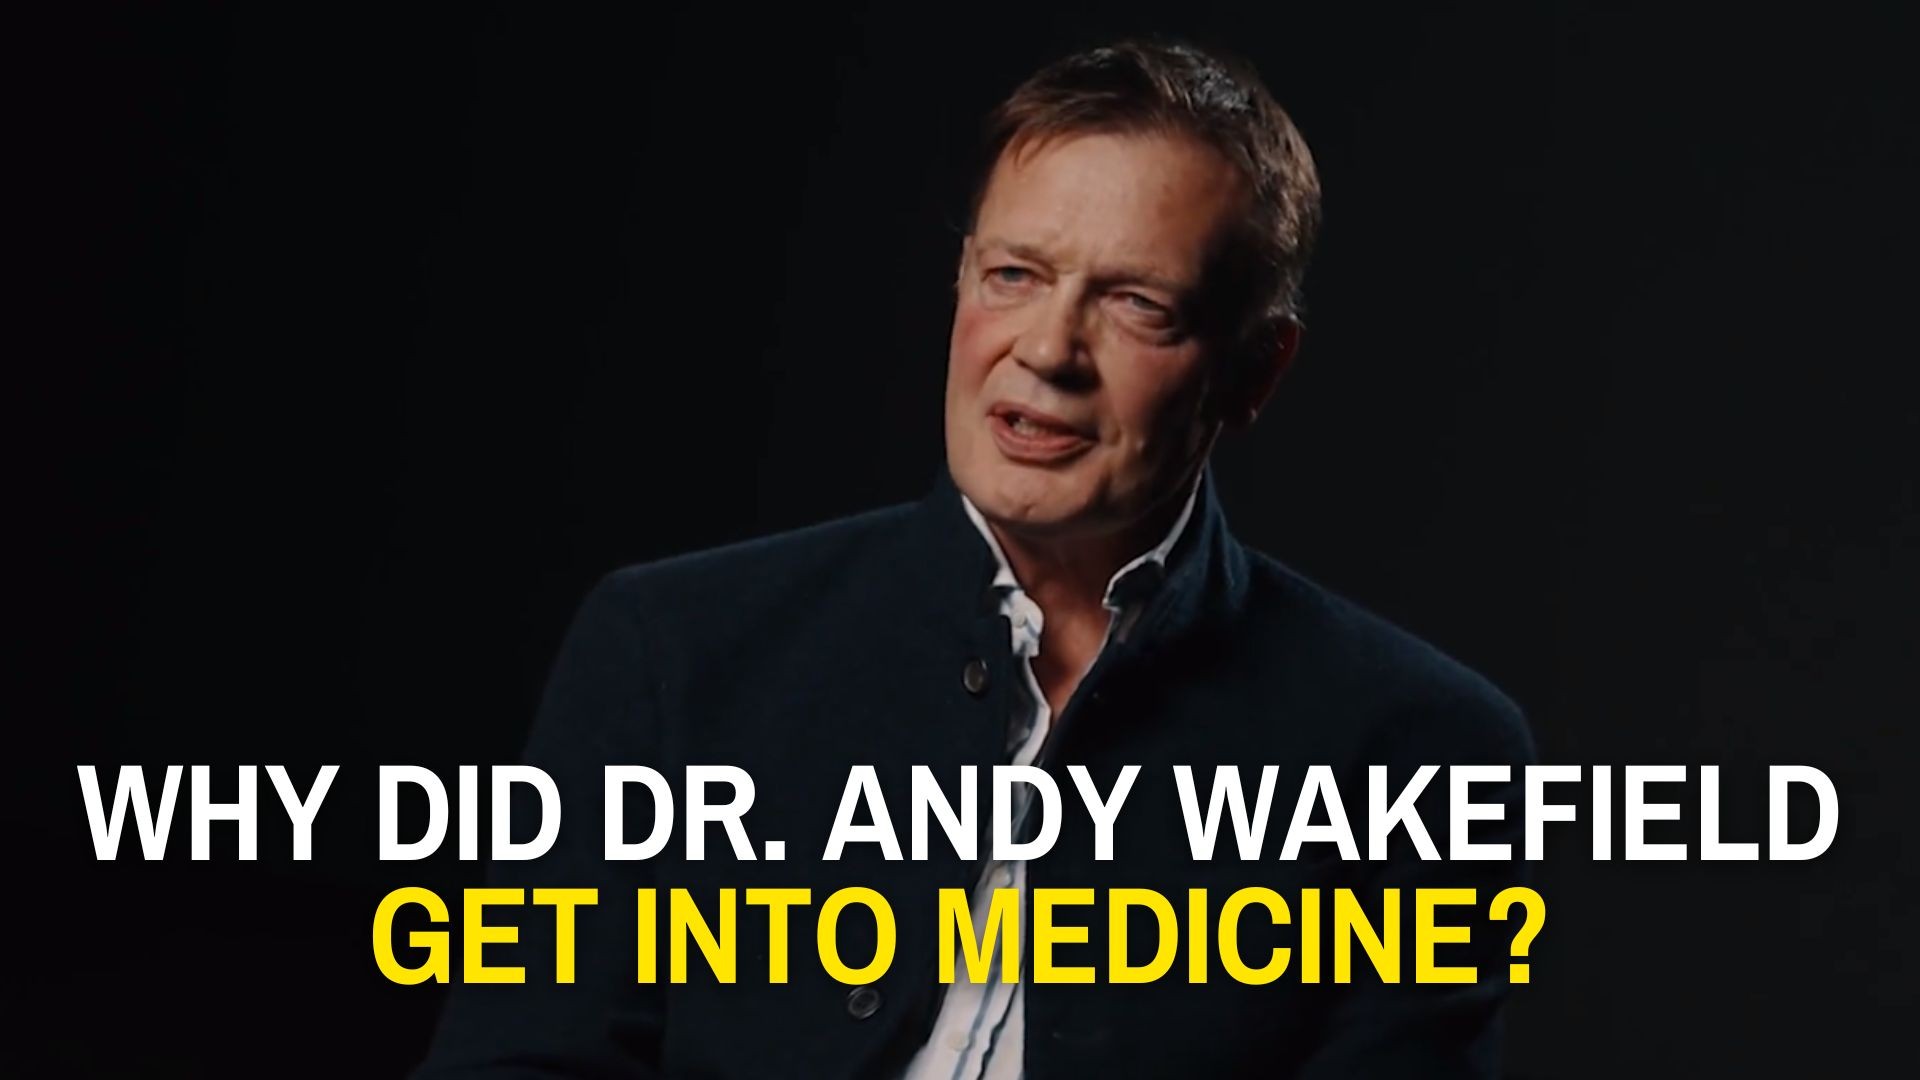 What Made  Dr. Andy Wakefield Get Into Medicine?